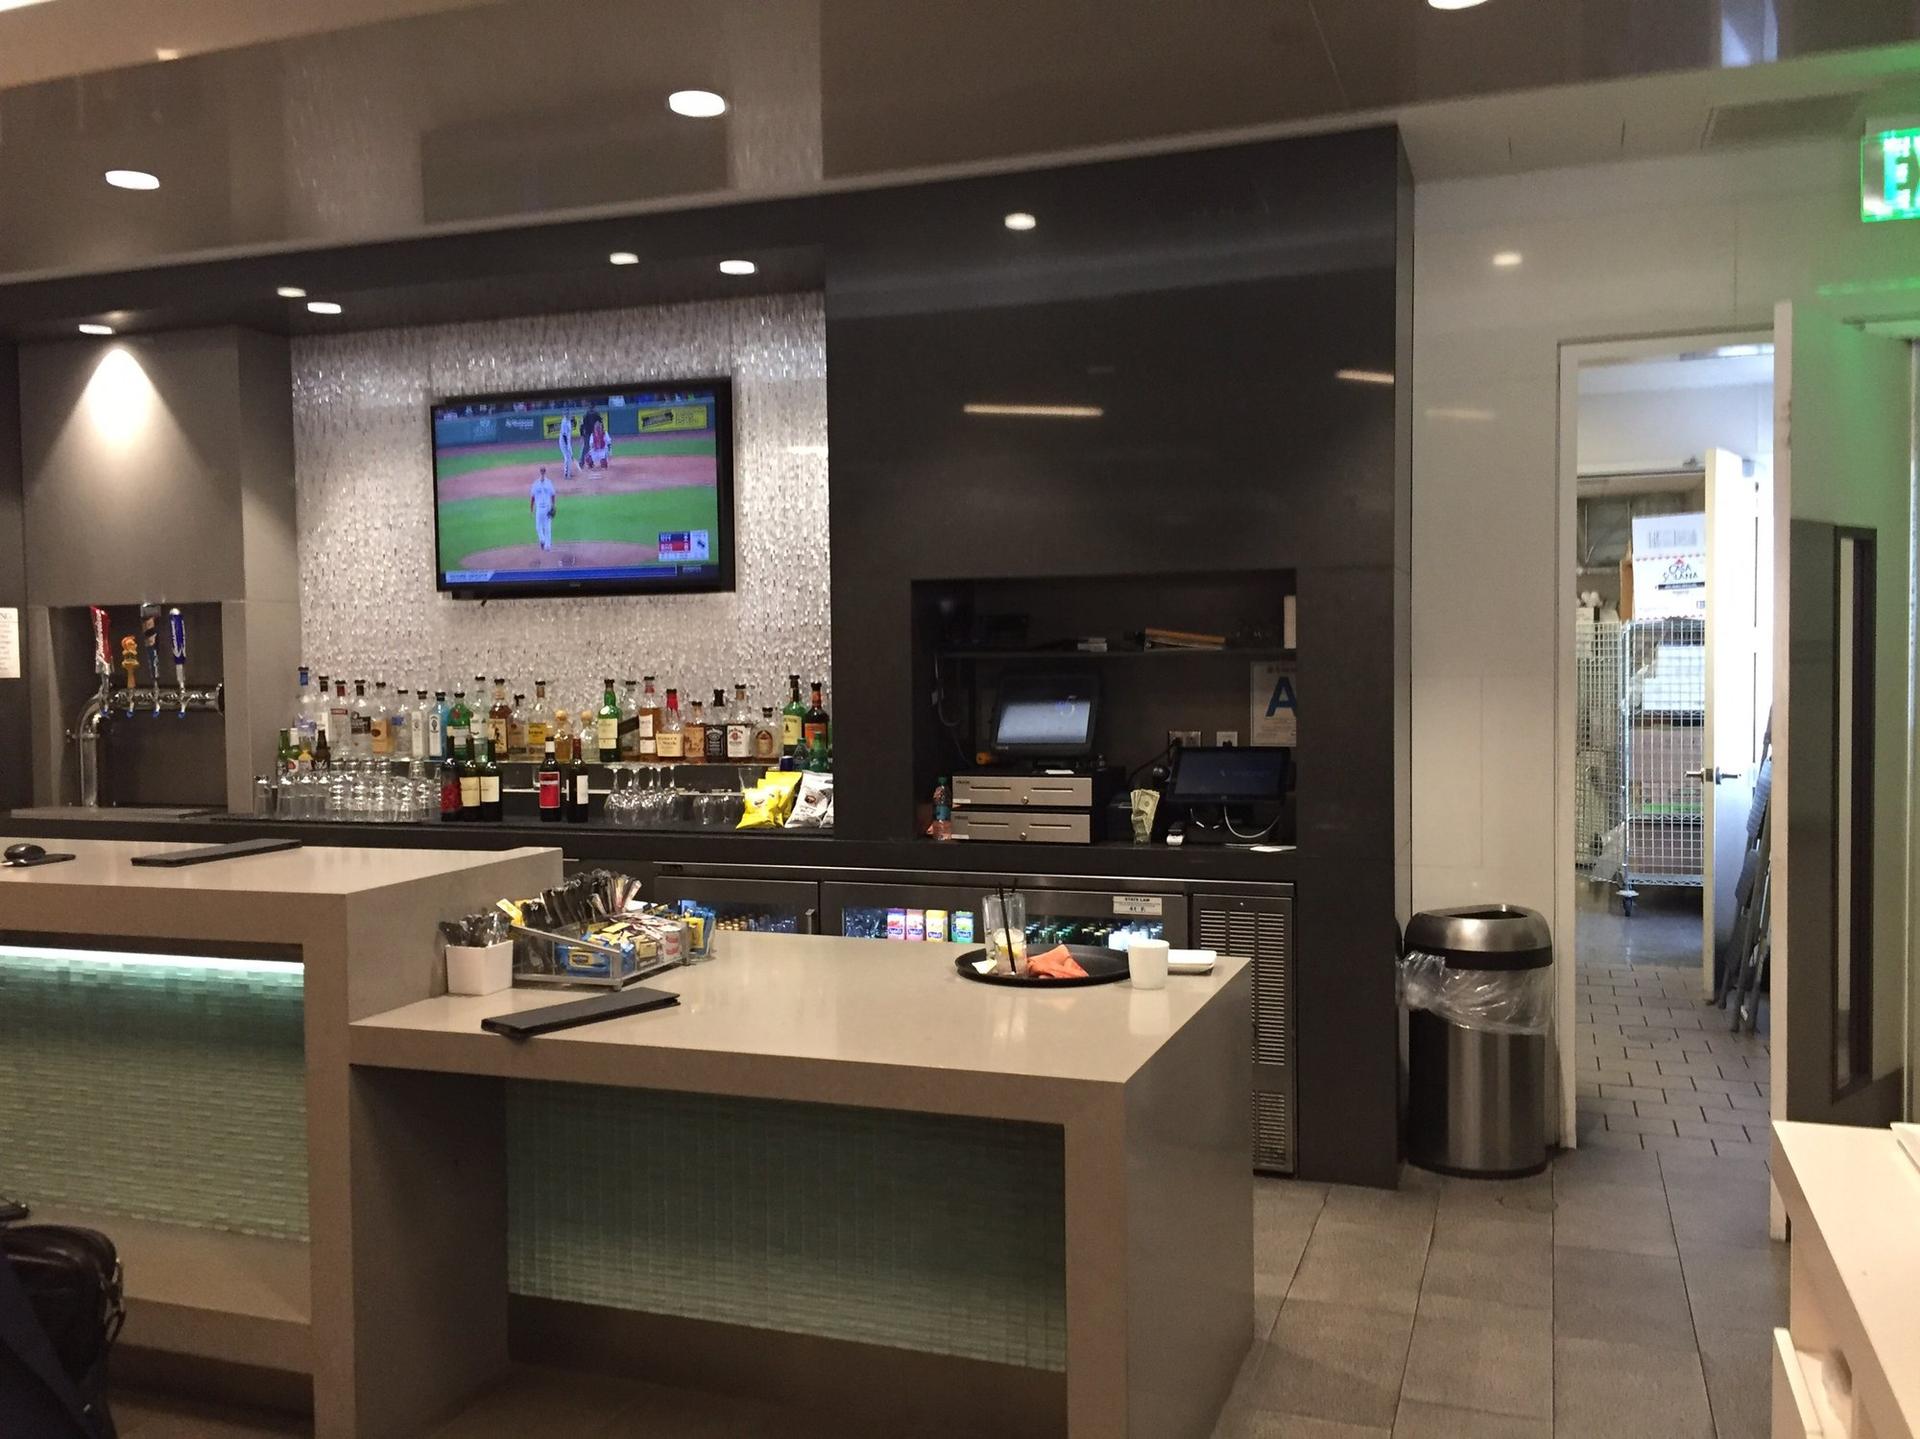 American Airlines Admirals Club image 34 of 43